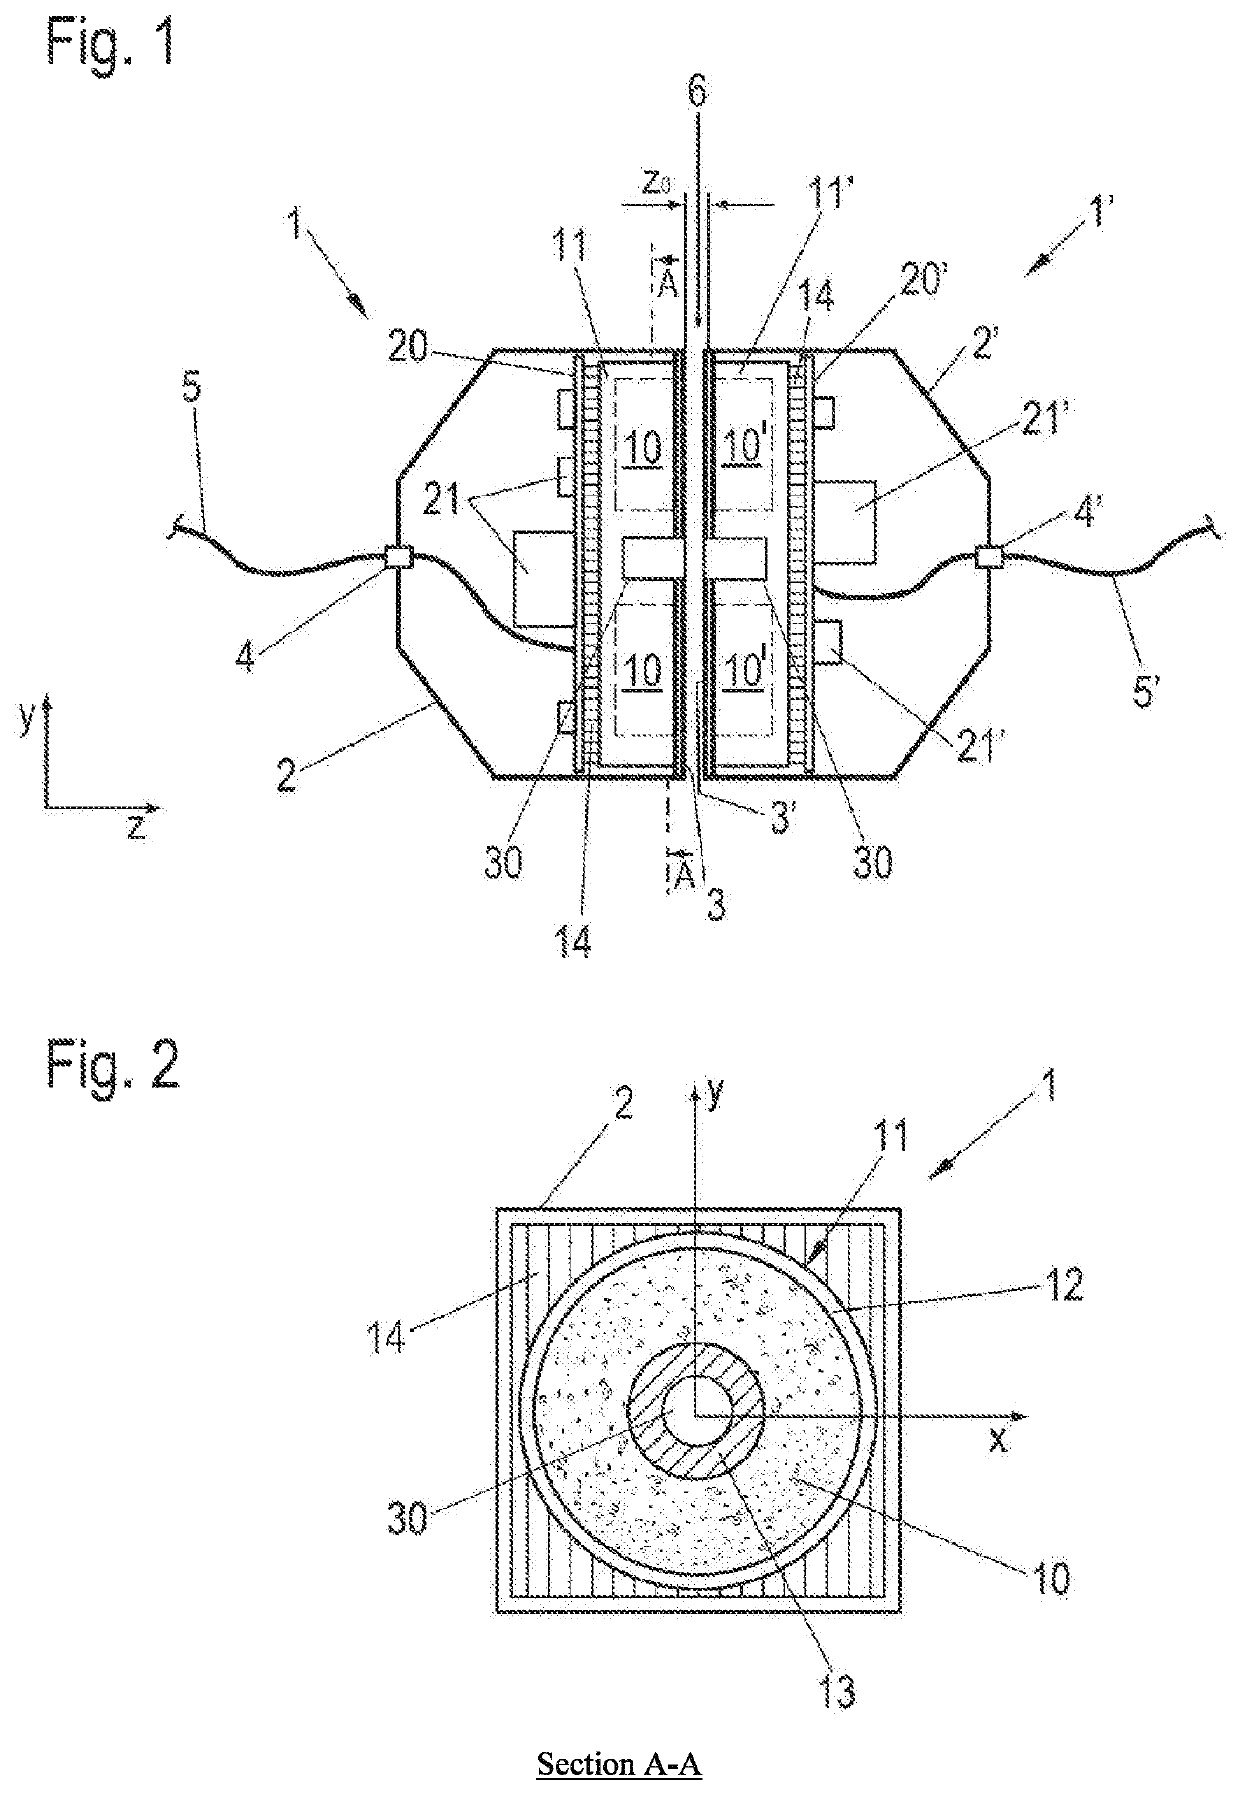 Contactless inductive energy transmission device and method